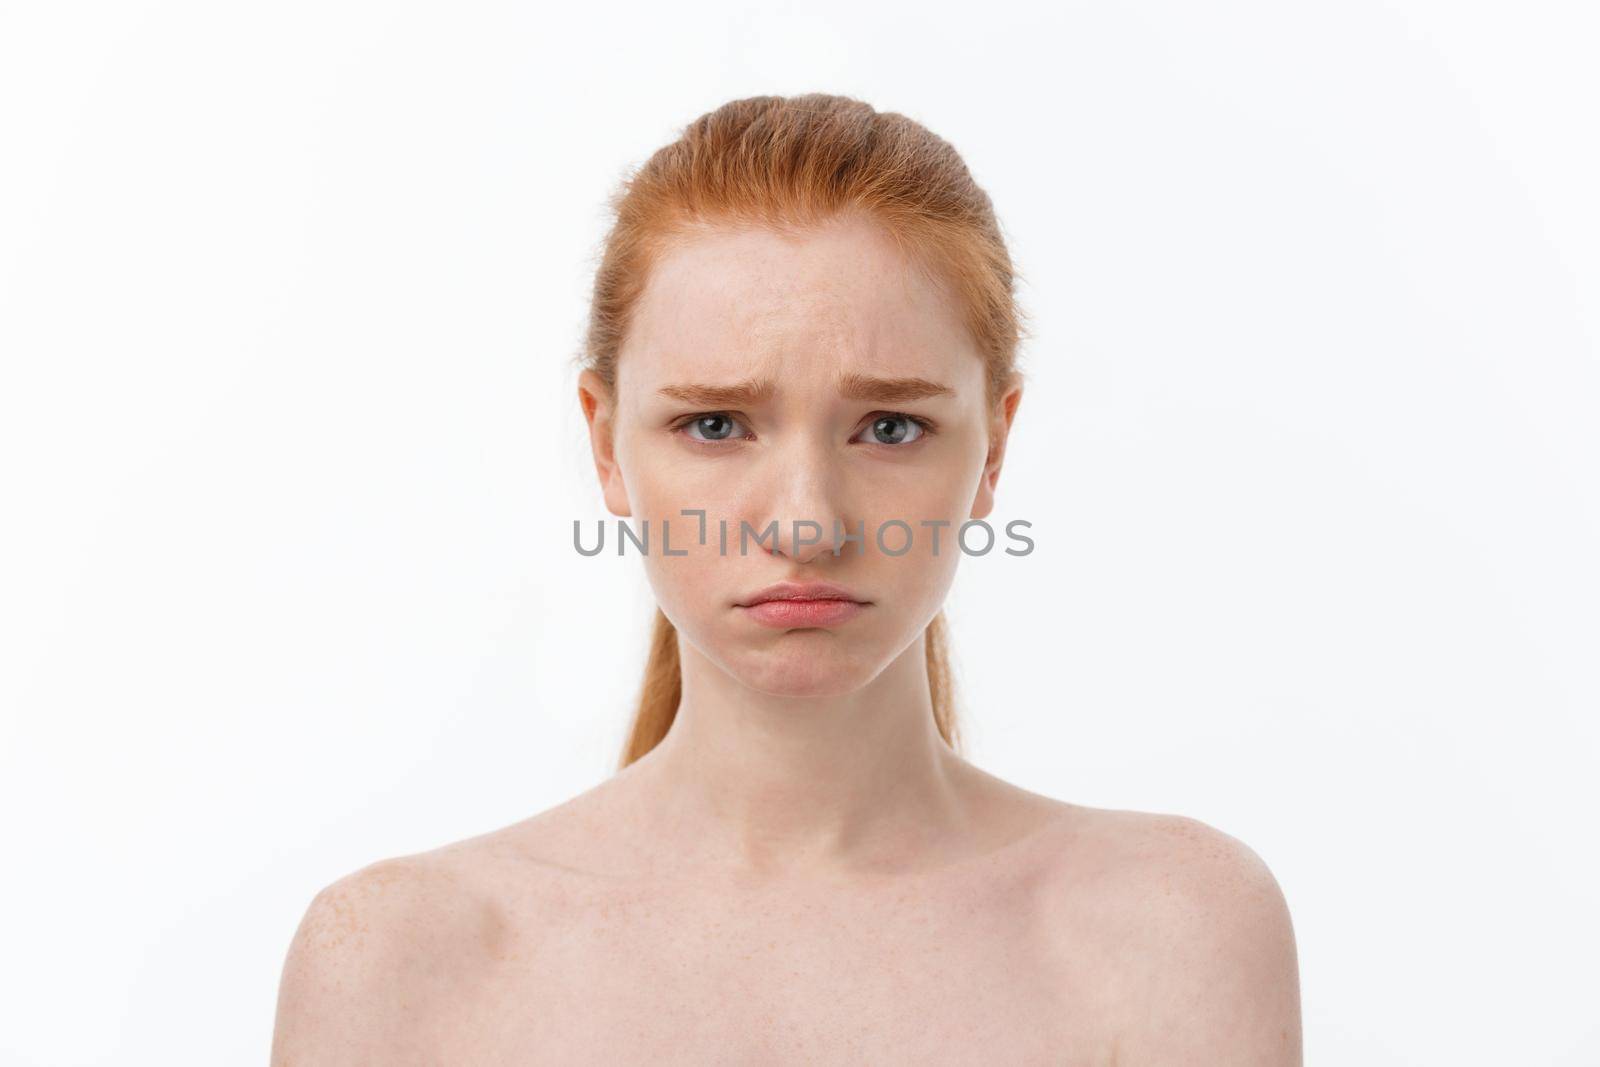 Portrait sad serious young woman with disappointed facial expression.. isolated on white background, looking at camera.